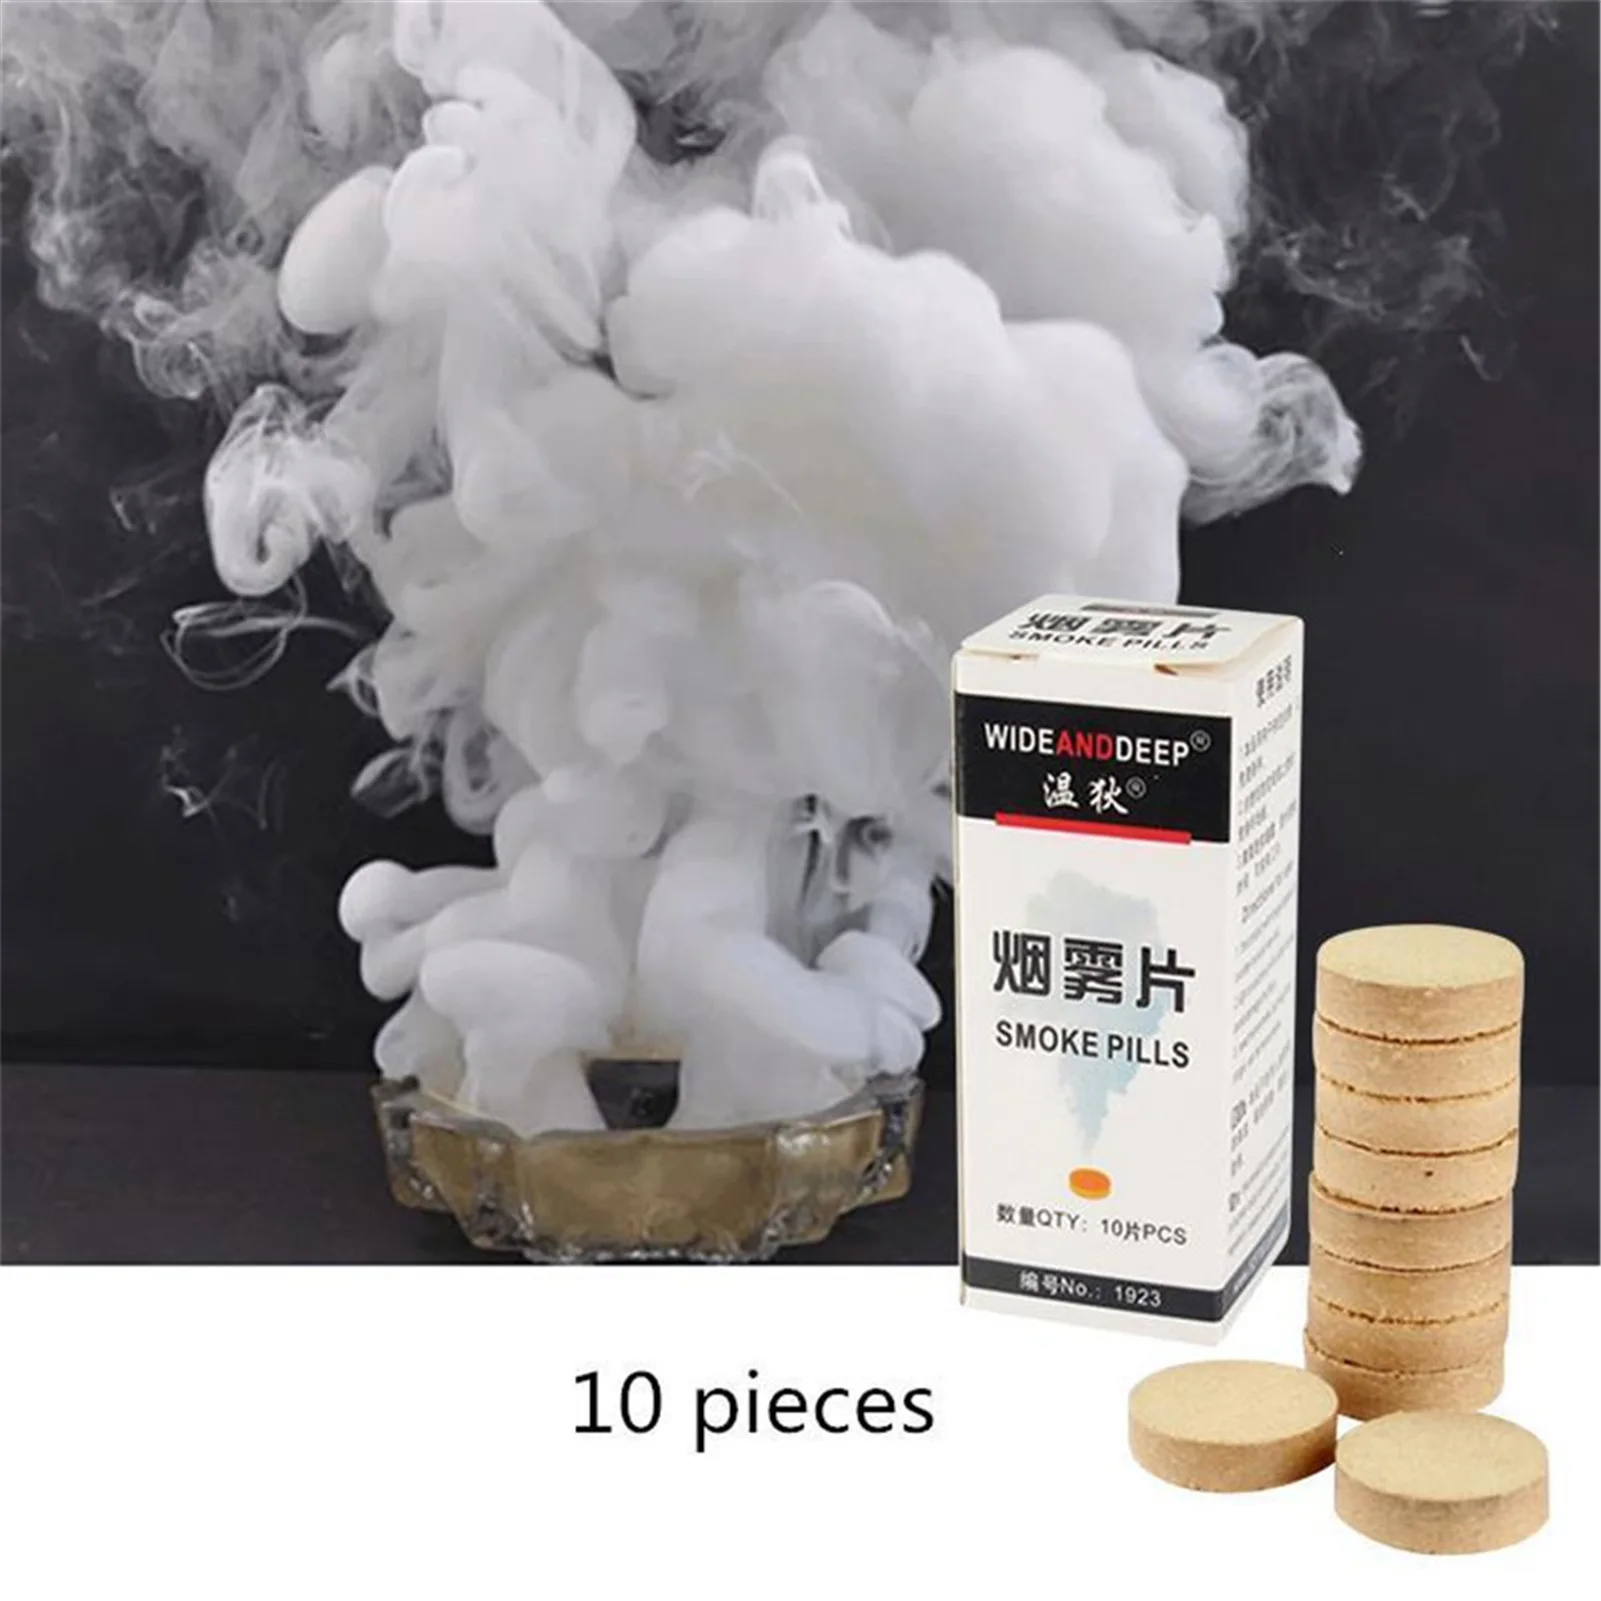 PcsBox White Smoke Cake Pills Show Divine Halloween Photography Aid Decoration Tool Props Round Party DIY Decor